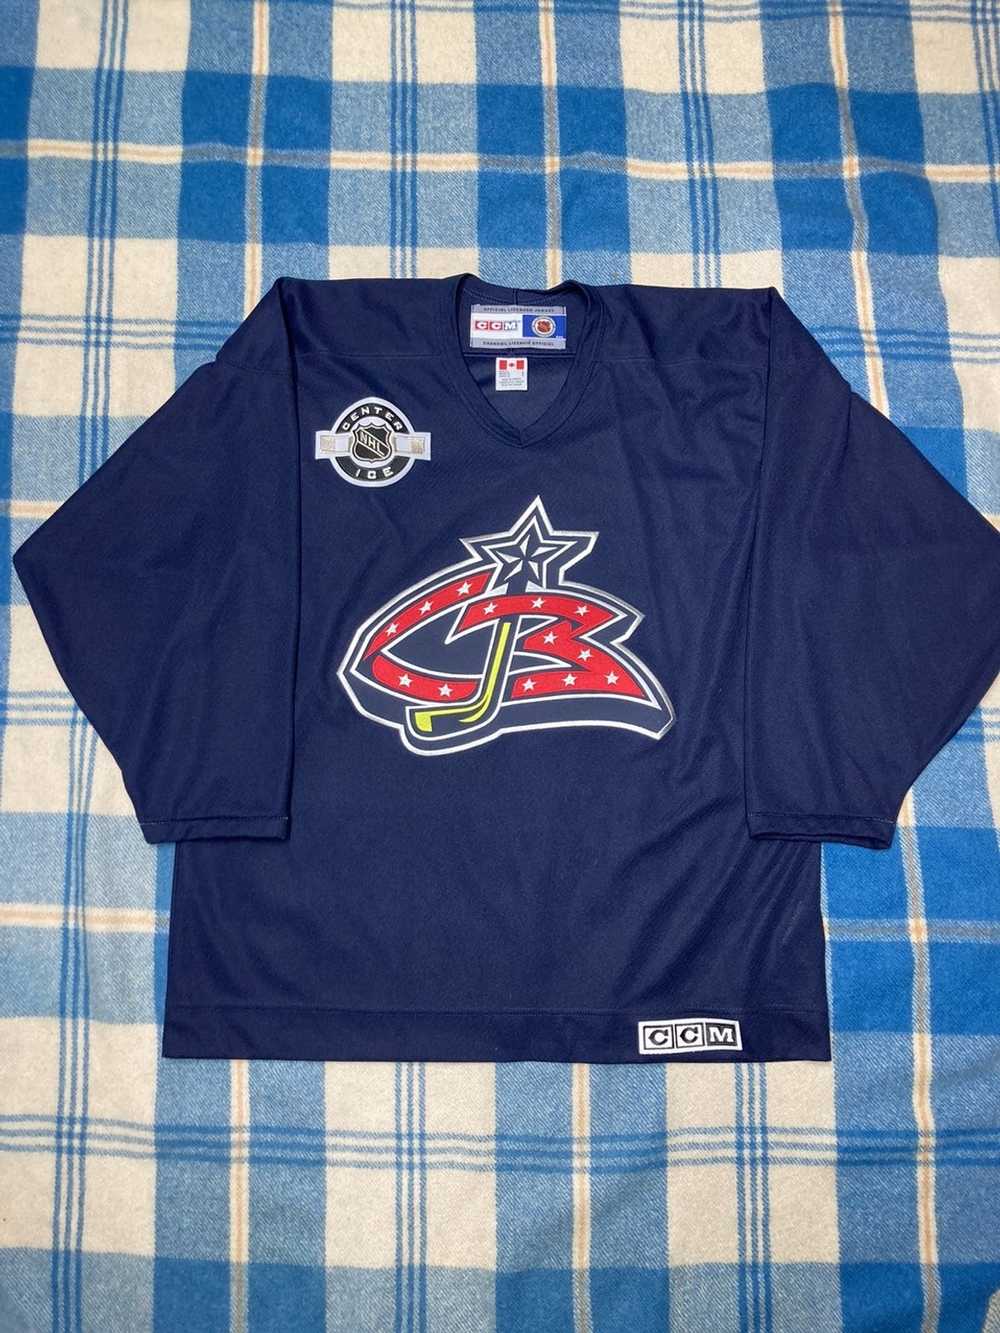 Columbus BLUE JACKETS Officially Licensed KOHO Jersey, Size Youth L/XL